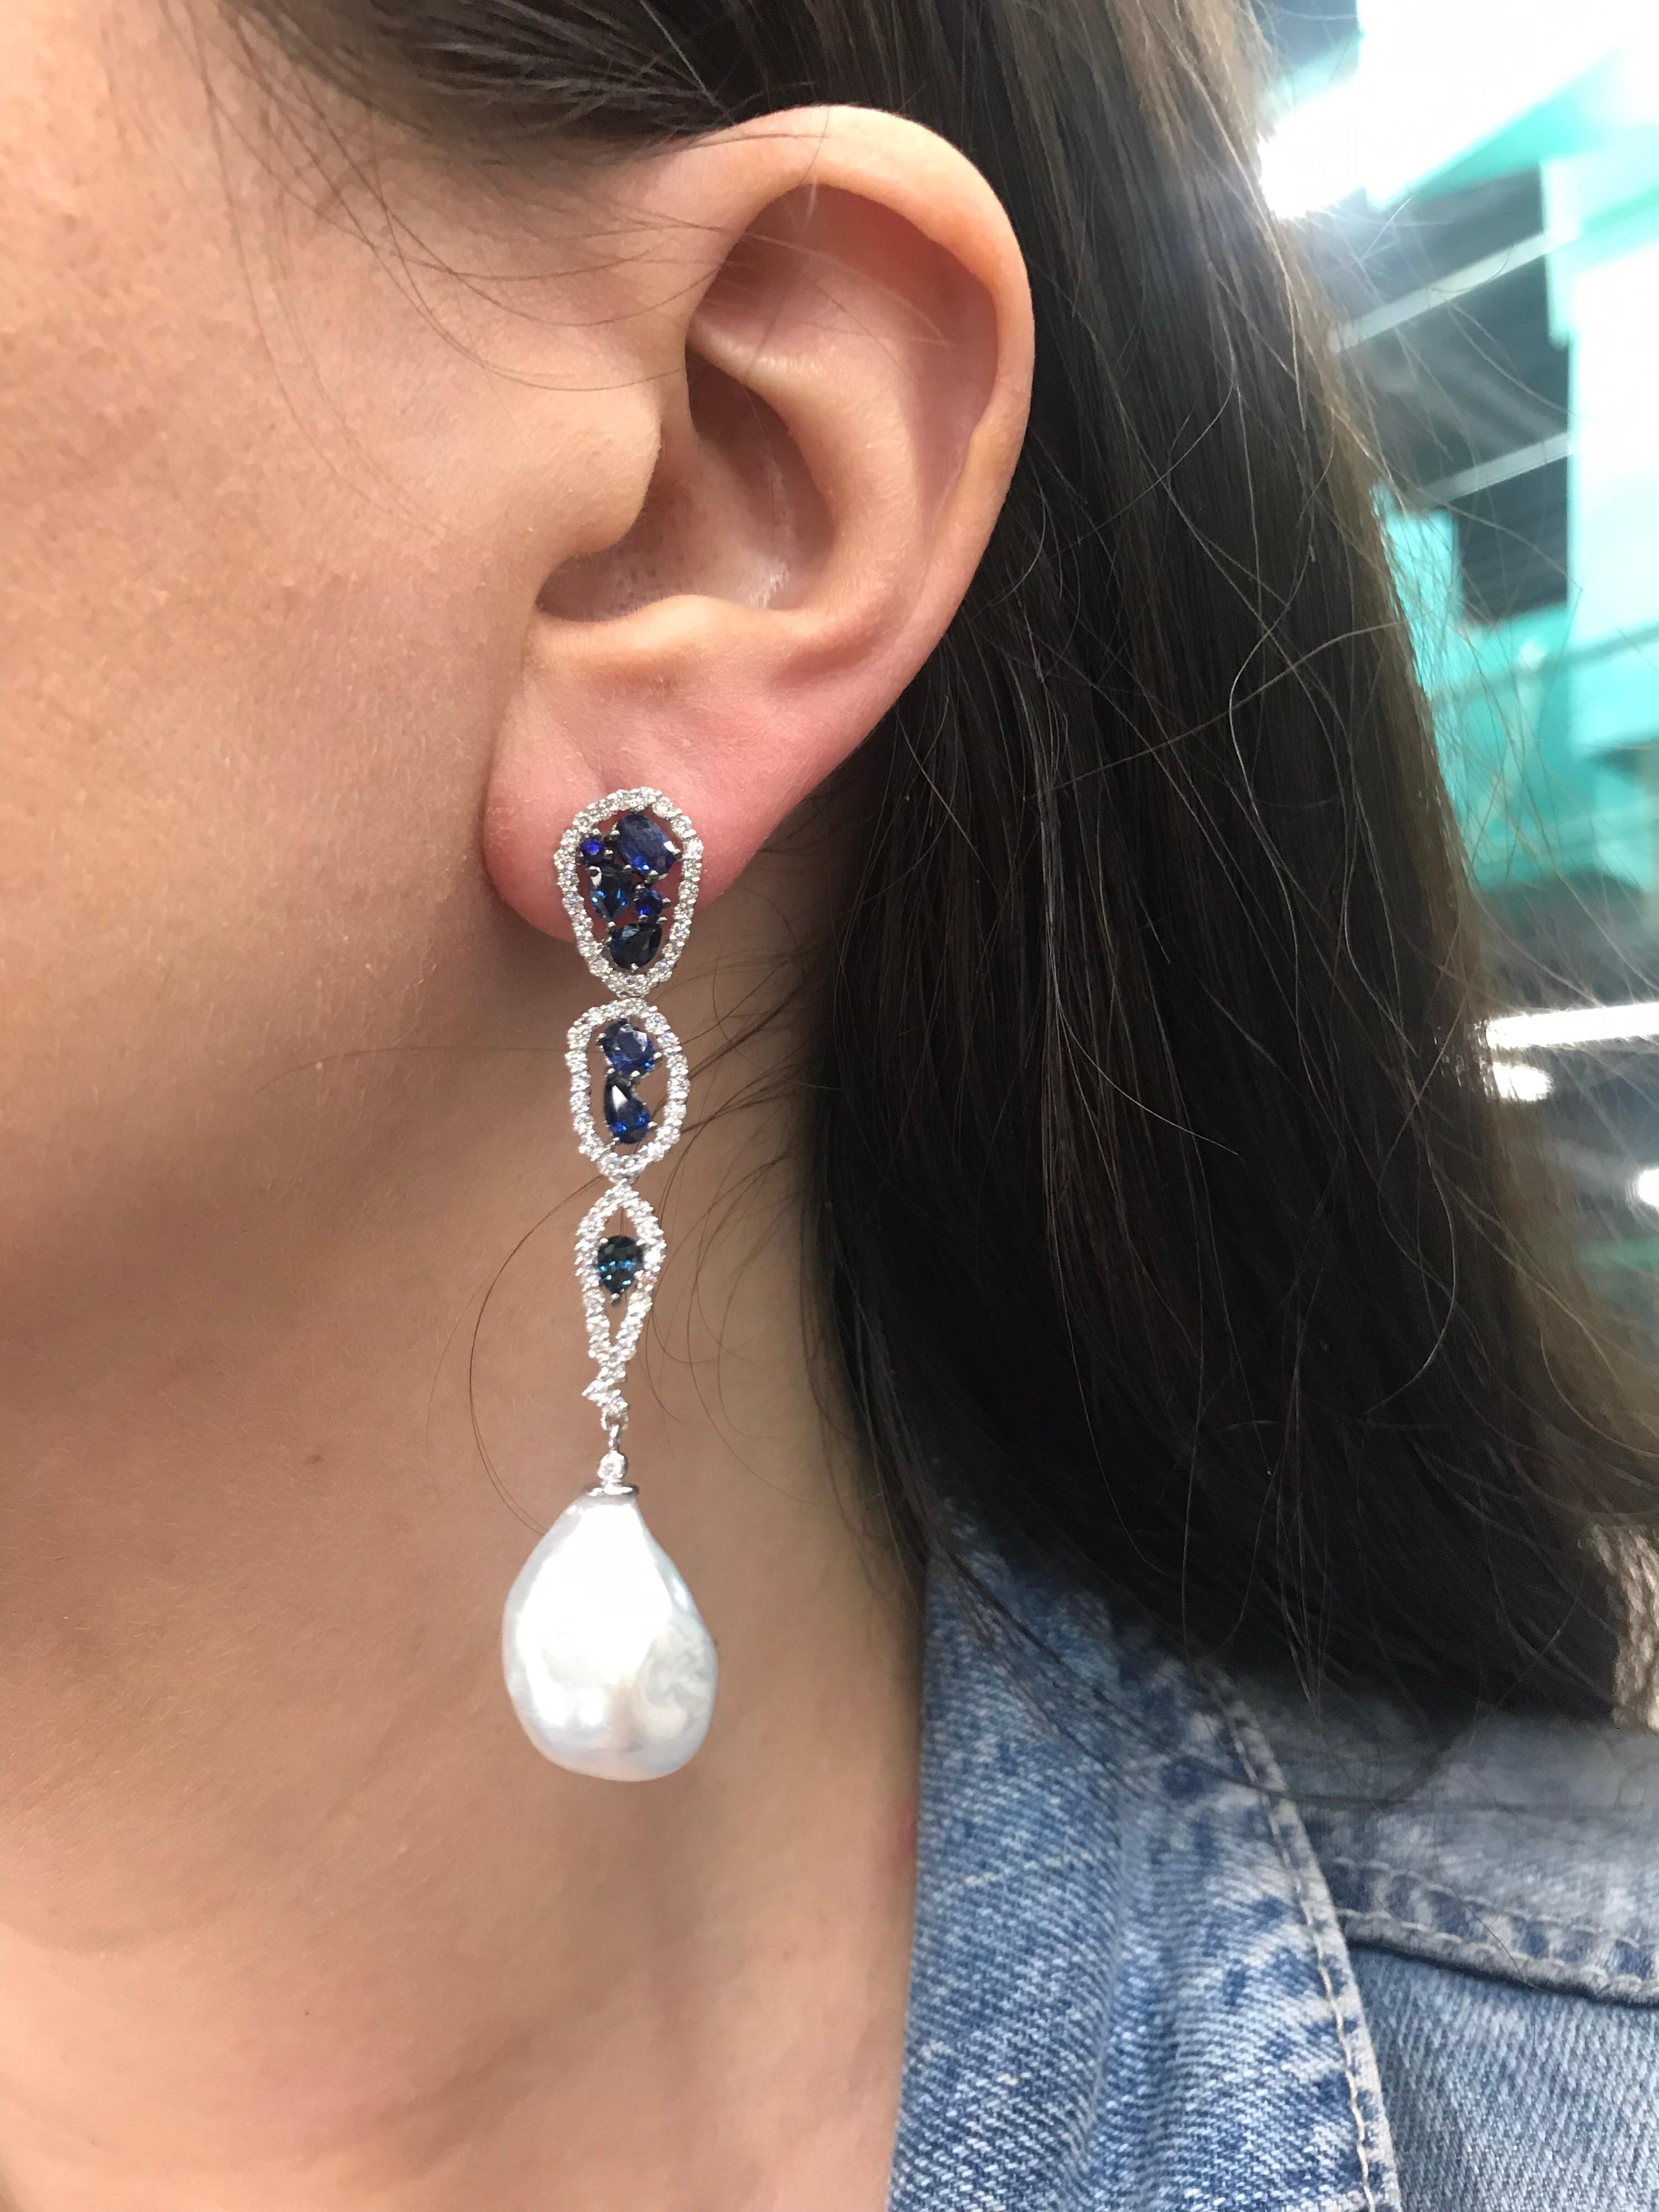 18K White gold drop earrings featuring 16 blue sapphires weighing 3.10 carats flanked with round brilliants weighing 1.28 carats and two South Sea Baroque Pearls measuring 13-14 mm. 